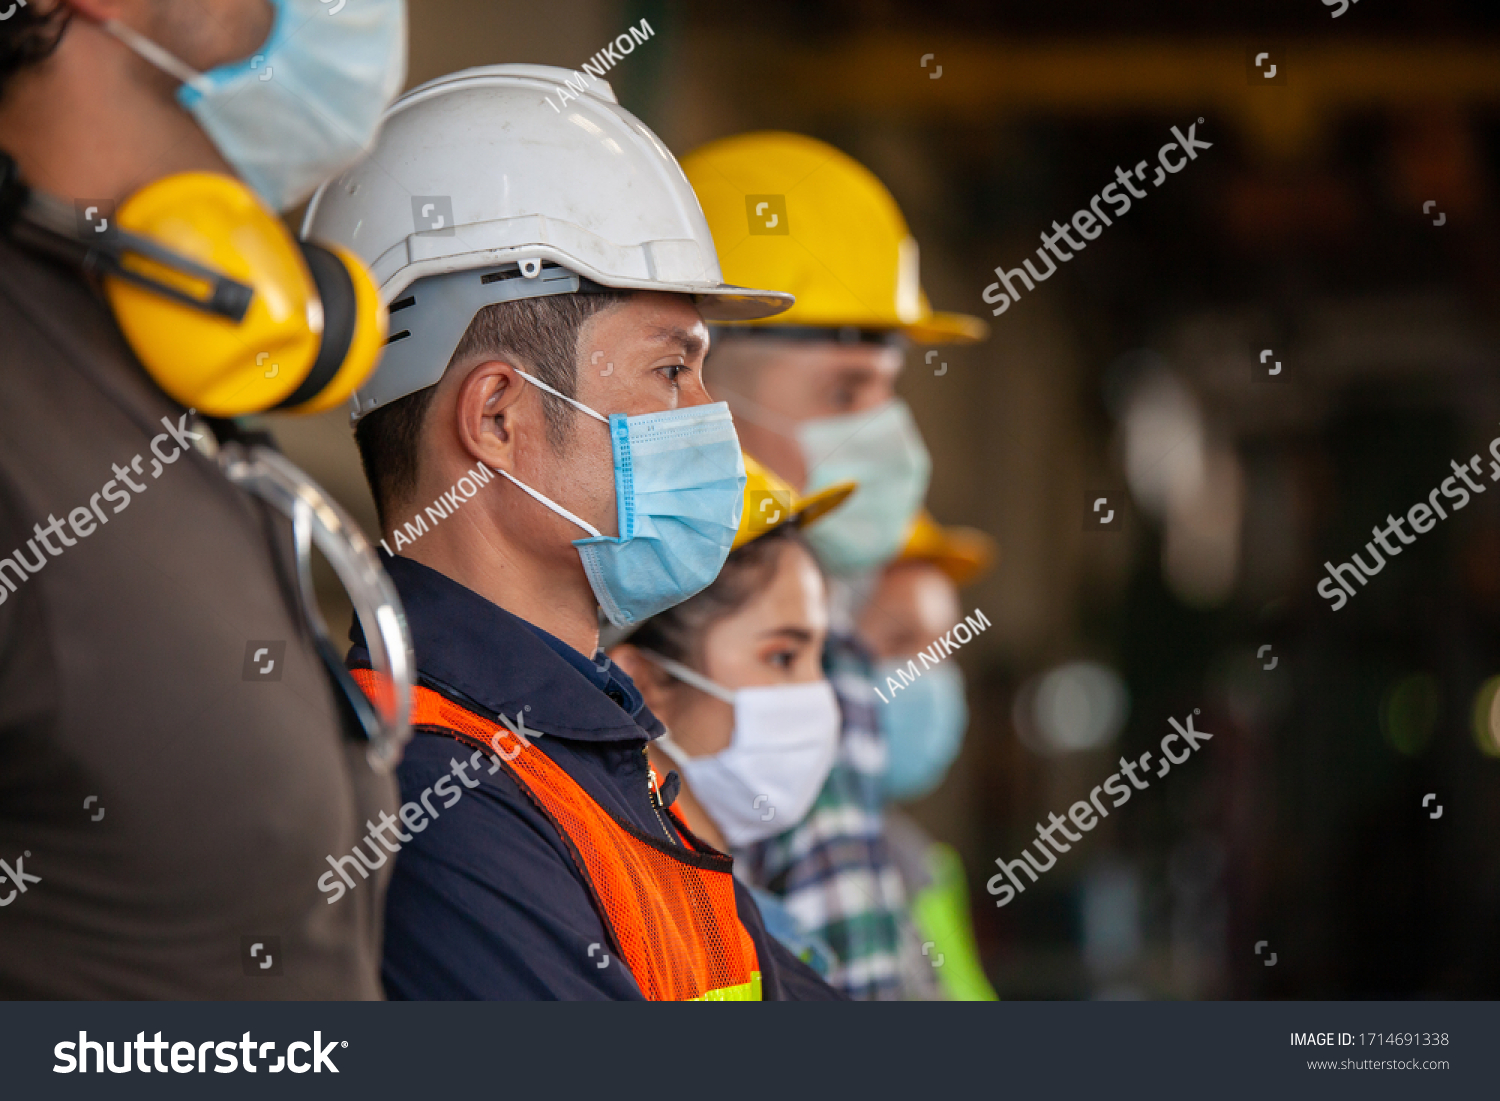 Workers wear protective face masks for safety in machine industrial factory. #1714691338